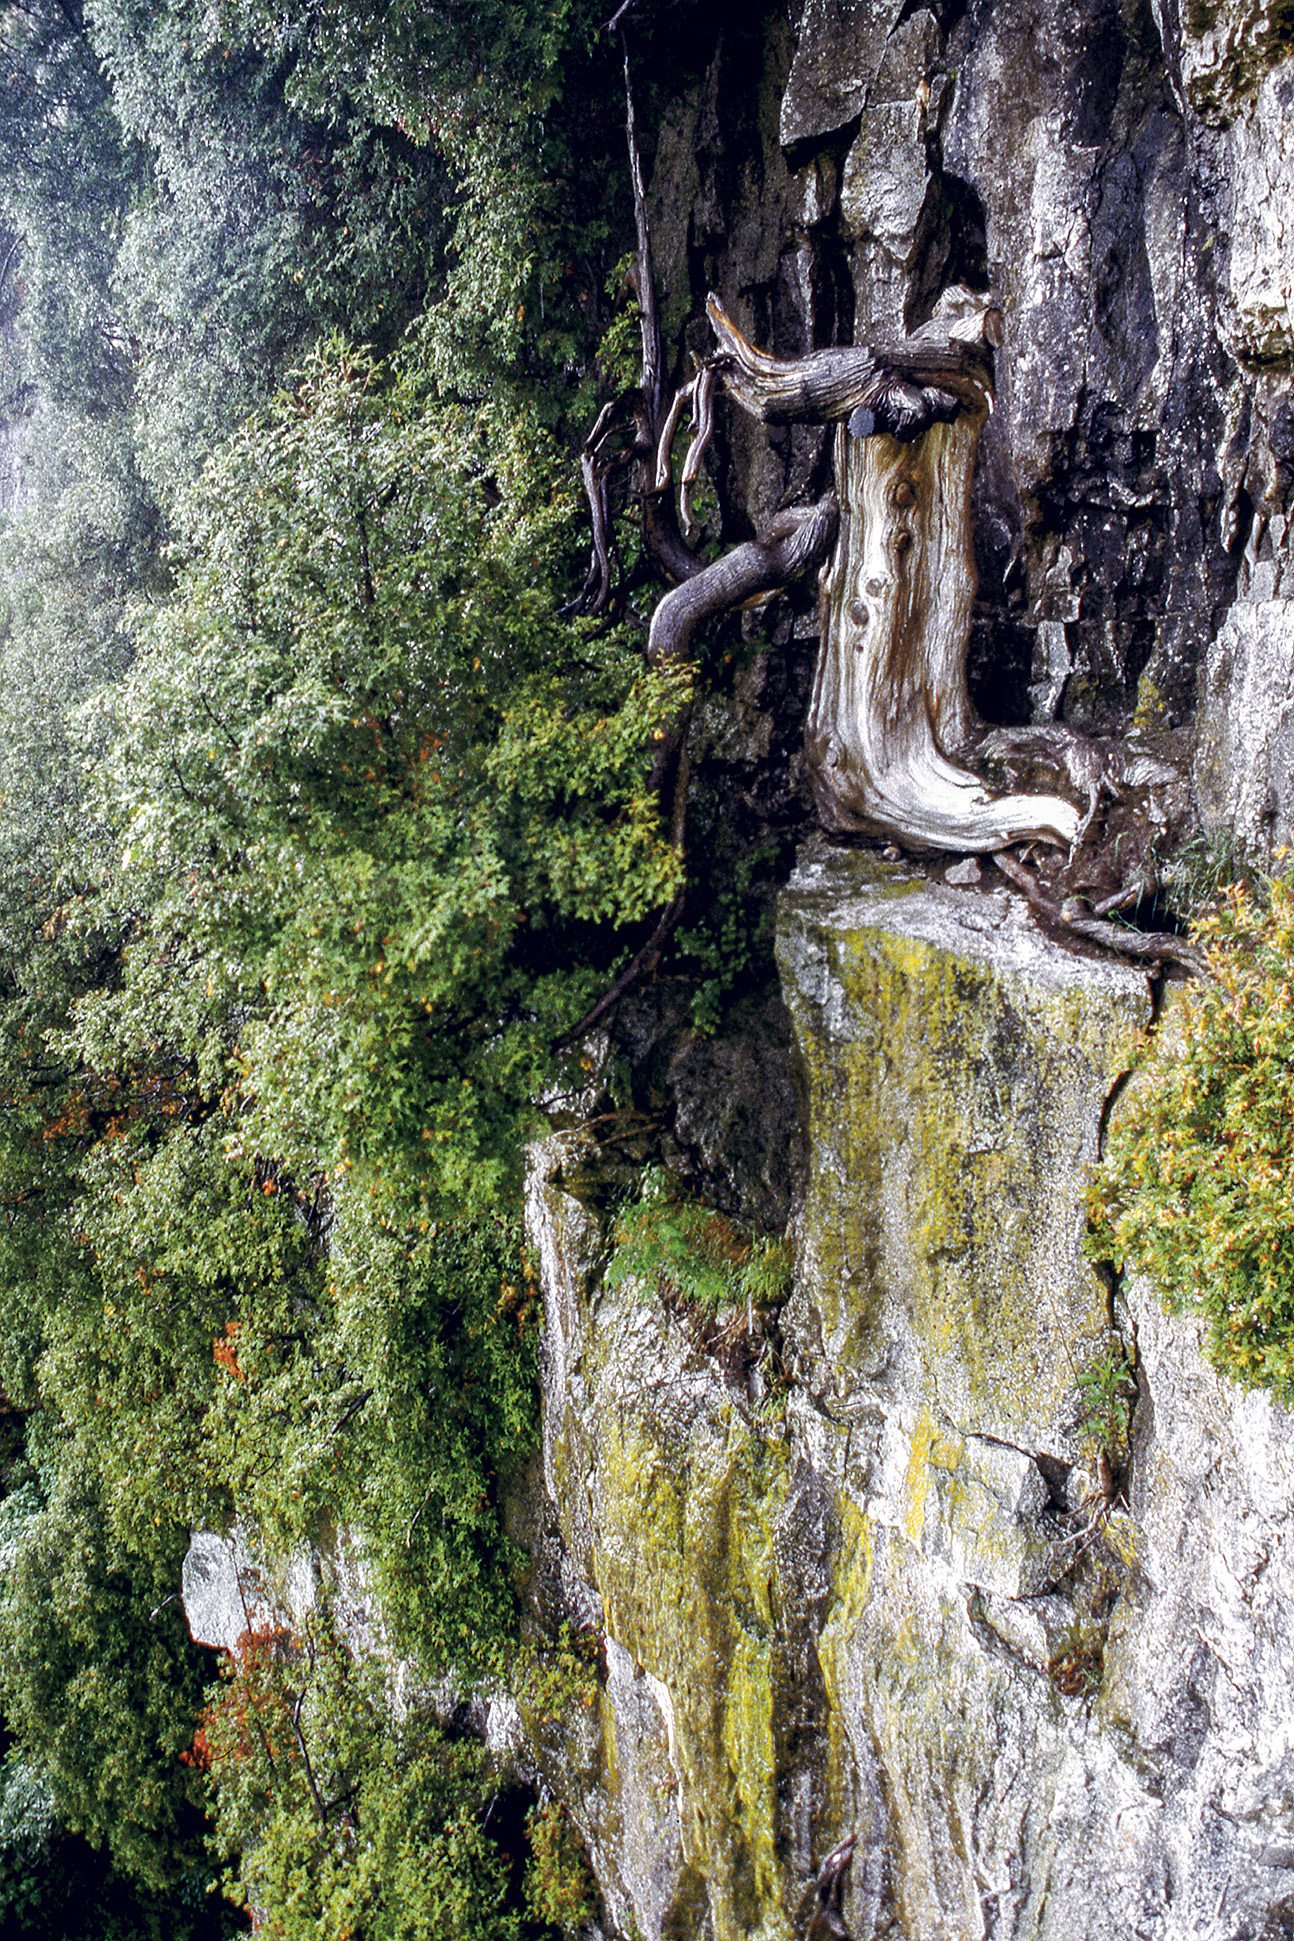 One of the oldest eastern white cedars on the cliffs of the Niagara Escarpment. This tree germinated in the year 1134, making it 883 years old today. Climbers likely trimmed the branches on its northern side to make way for a climbing route in 1992. At the time of the photograph, two living branches on the south side of the tree were keeping it alive, though scientists haven't been back to survey whether it survives today. [Photo] Peter Kelly